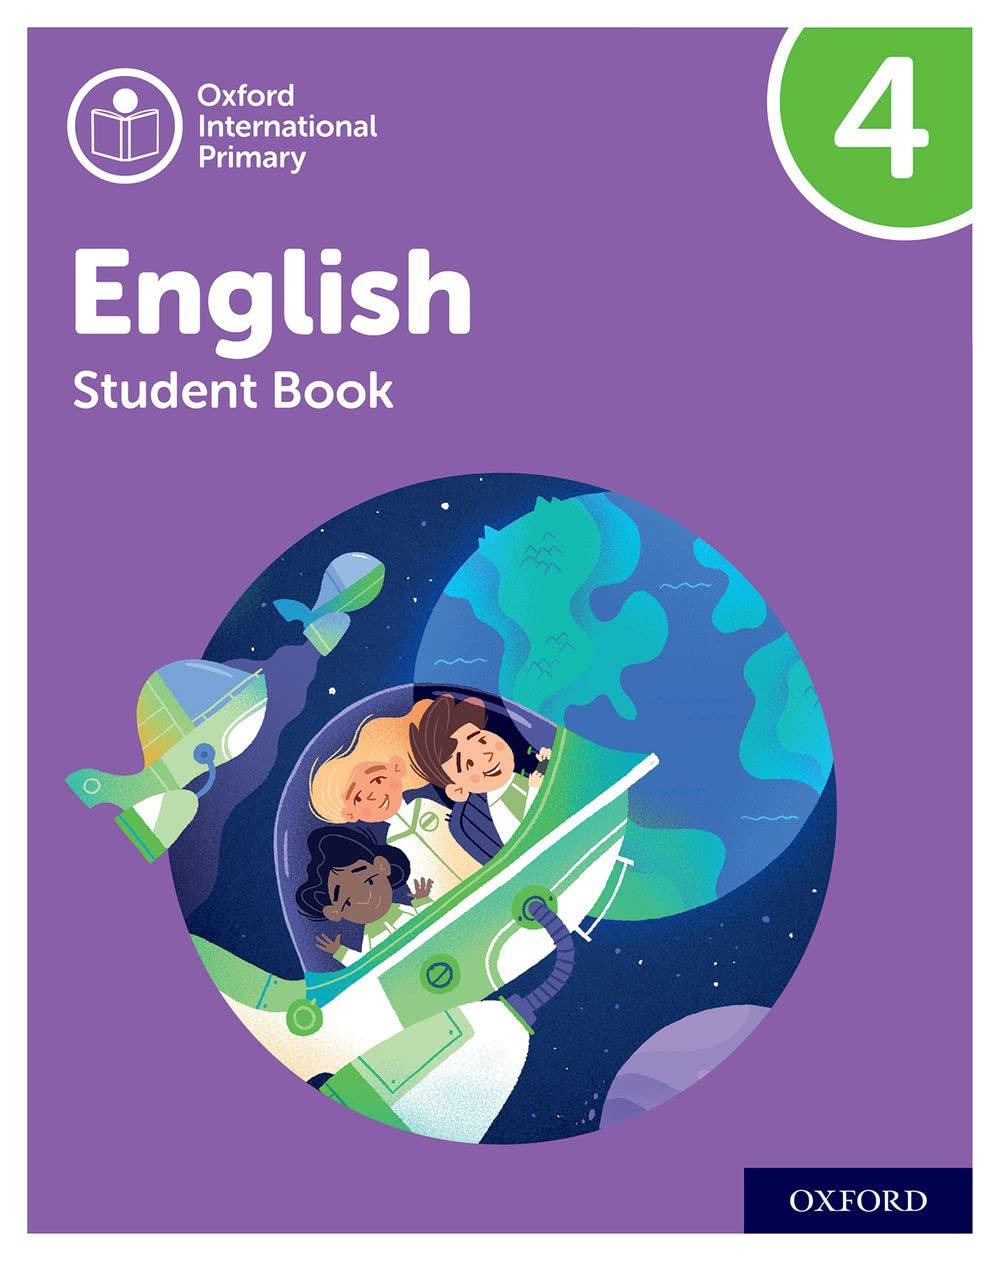 Book　Level　Oxford　Book　International　–　Primary　English:　Student　Mart